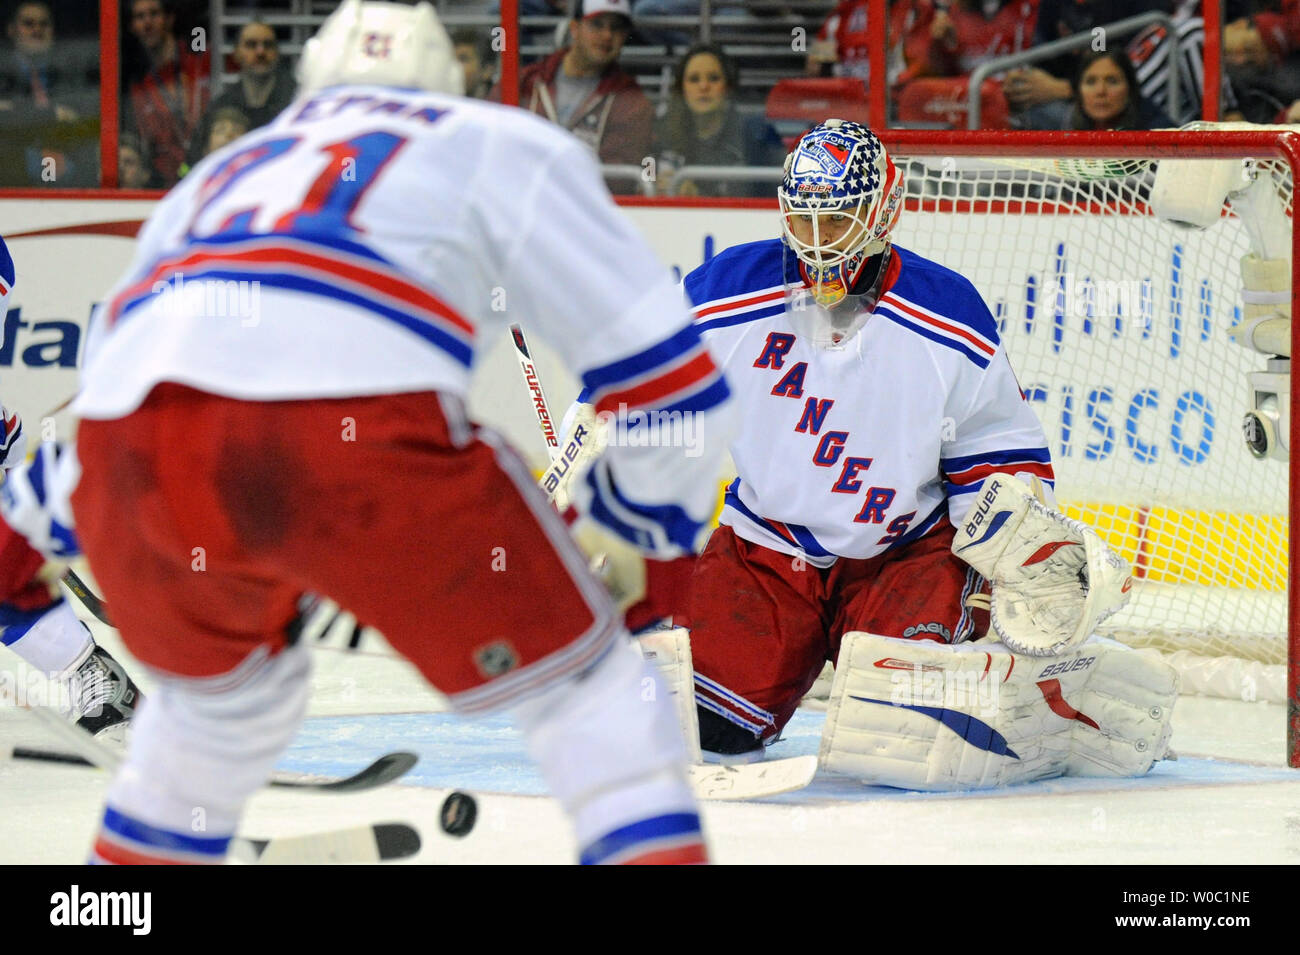 Martin Biron in net for Rangers today in Montreal – New York Daily